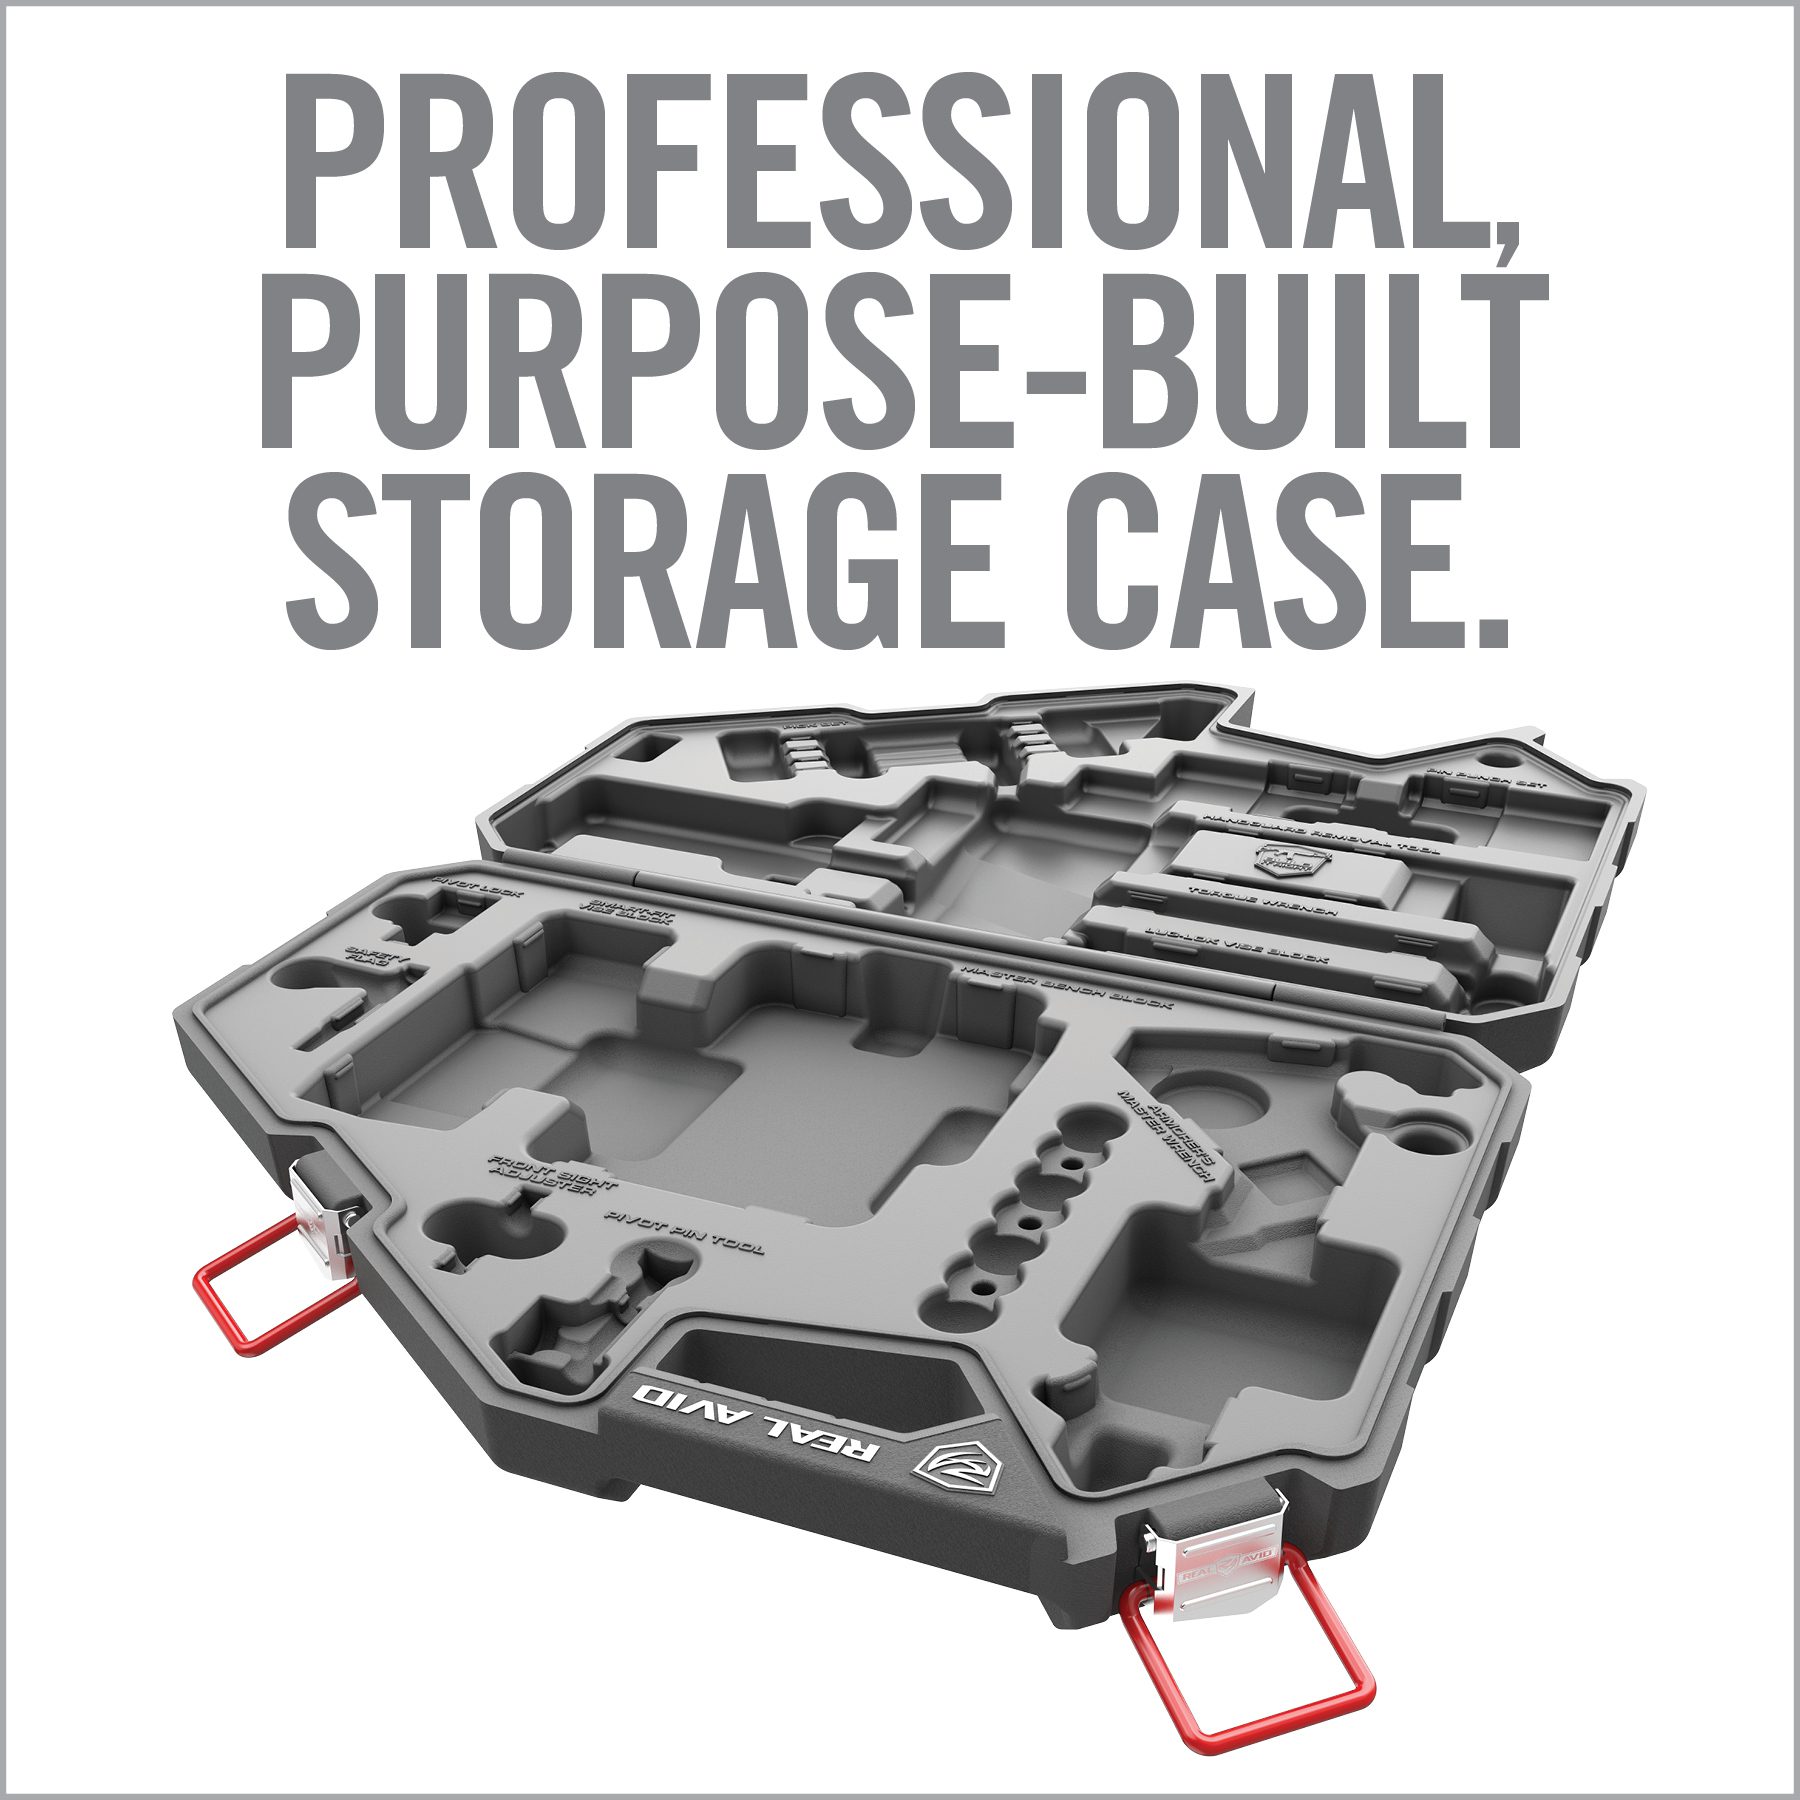 an advertisement for a professional purpose built storage case